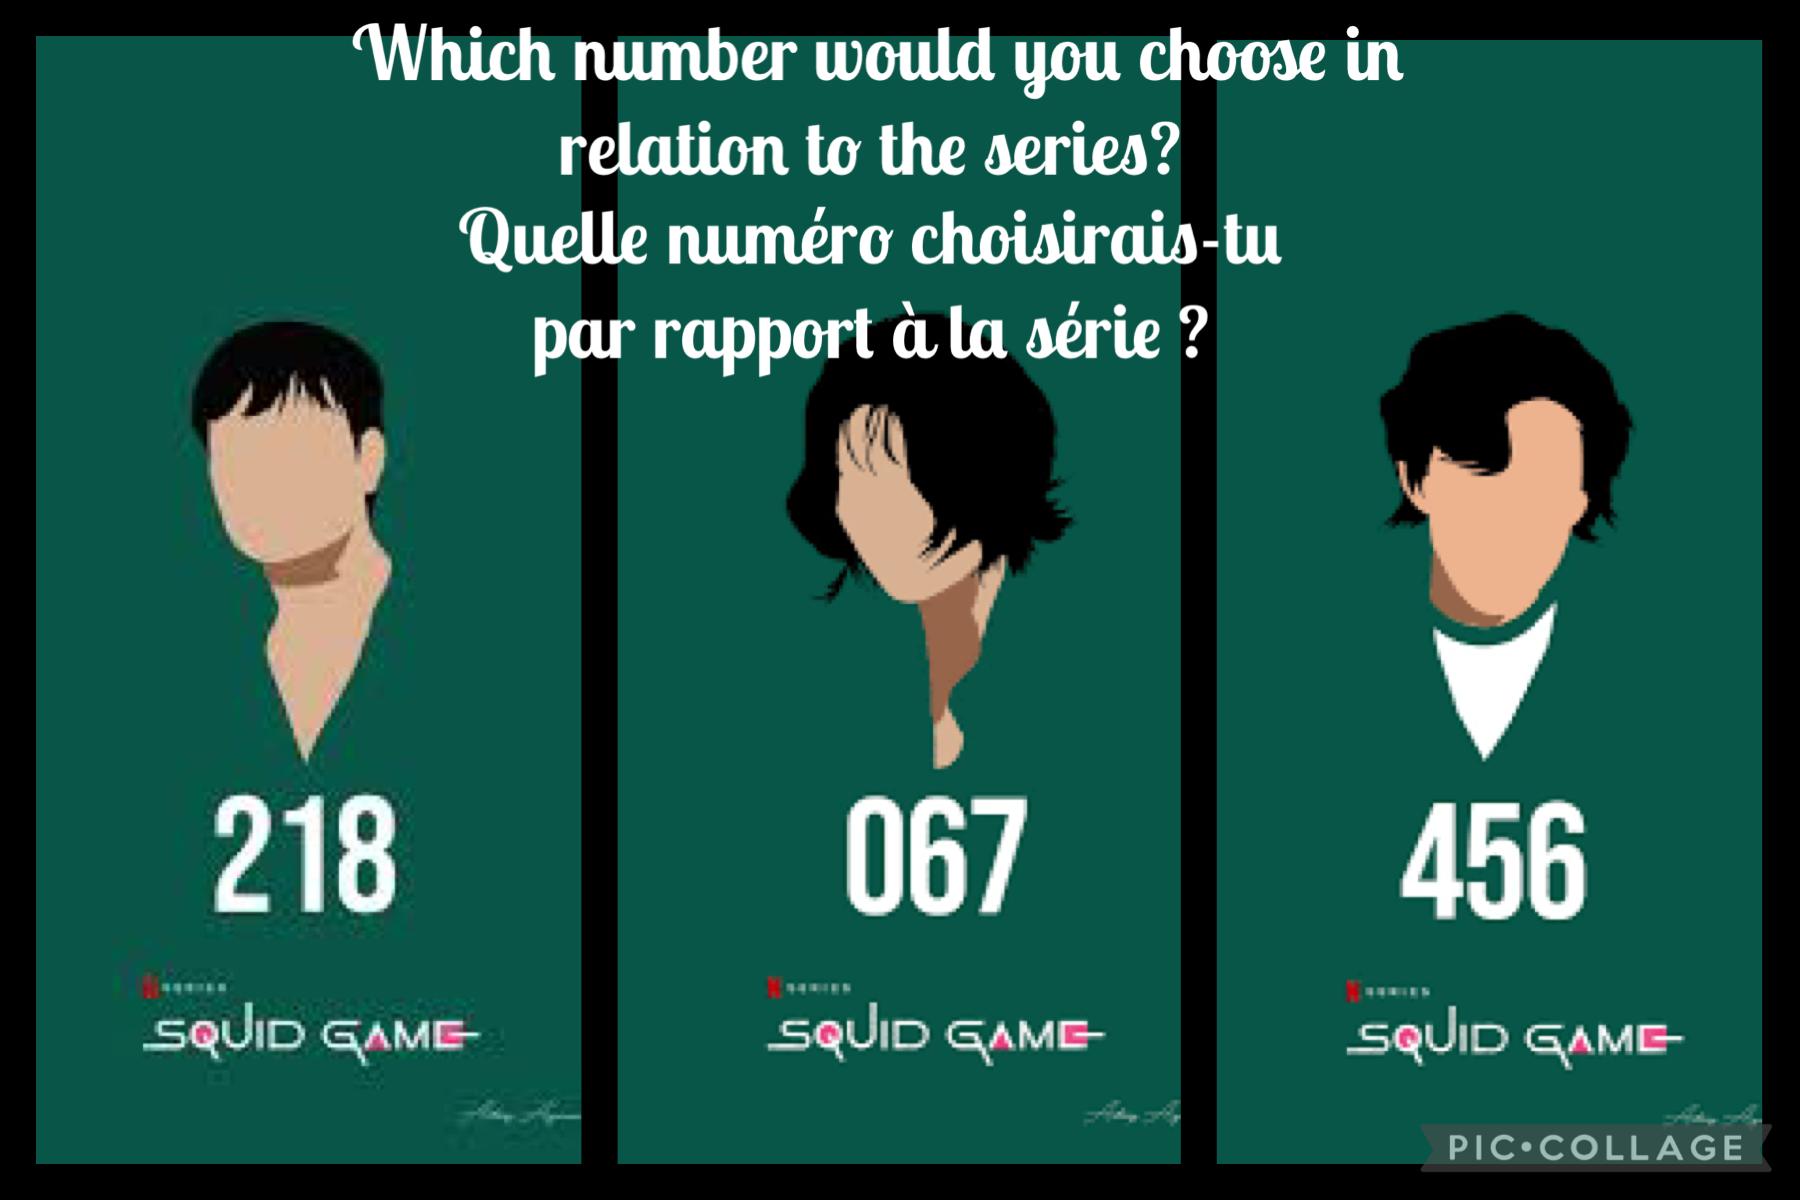 Which number would you choose in relation to the series?